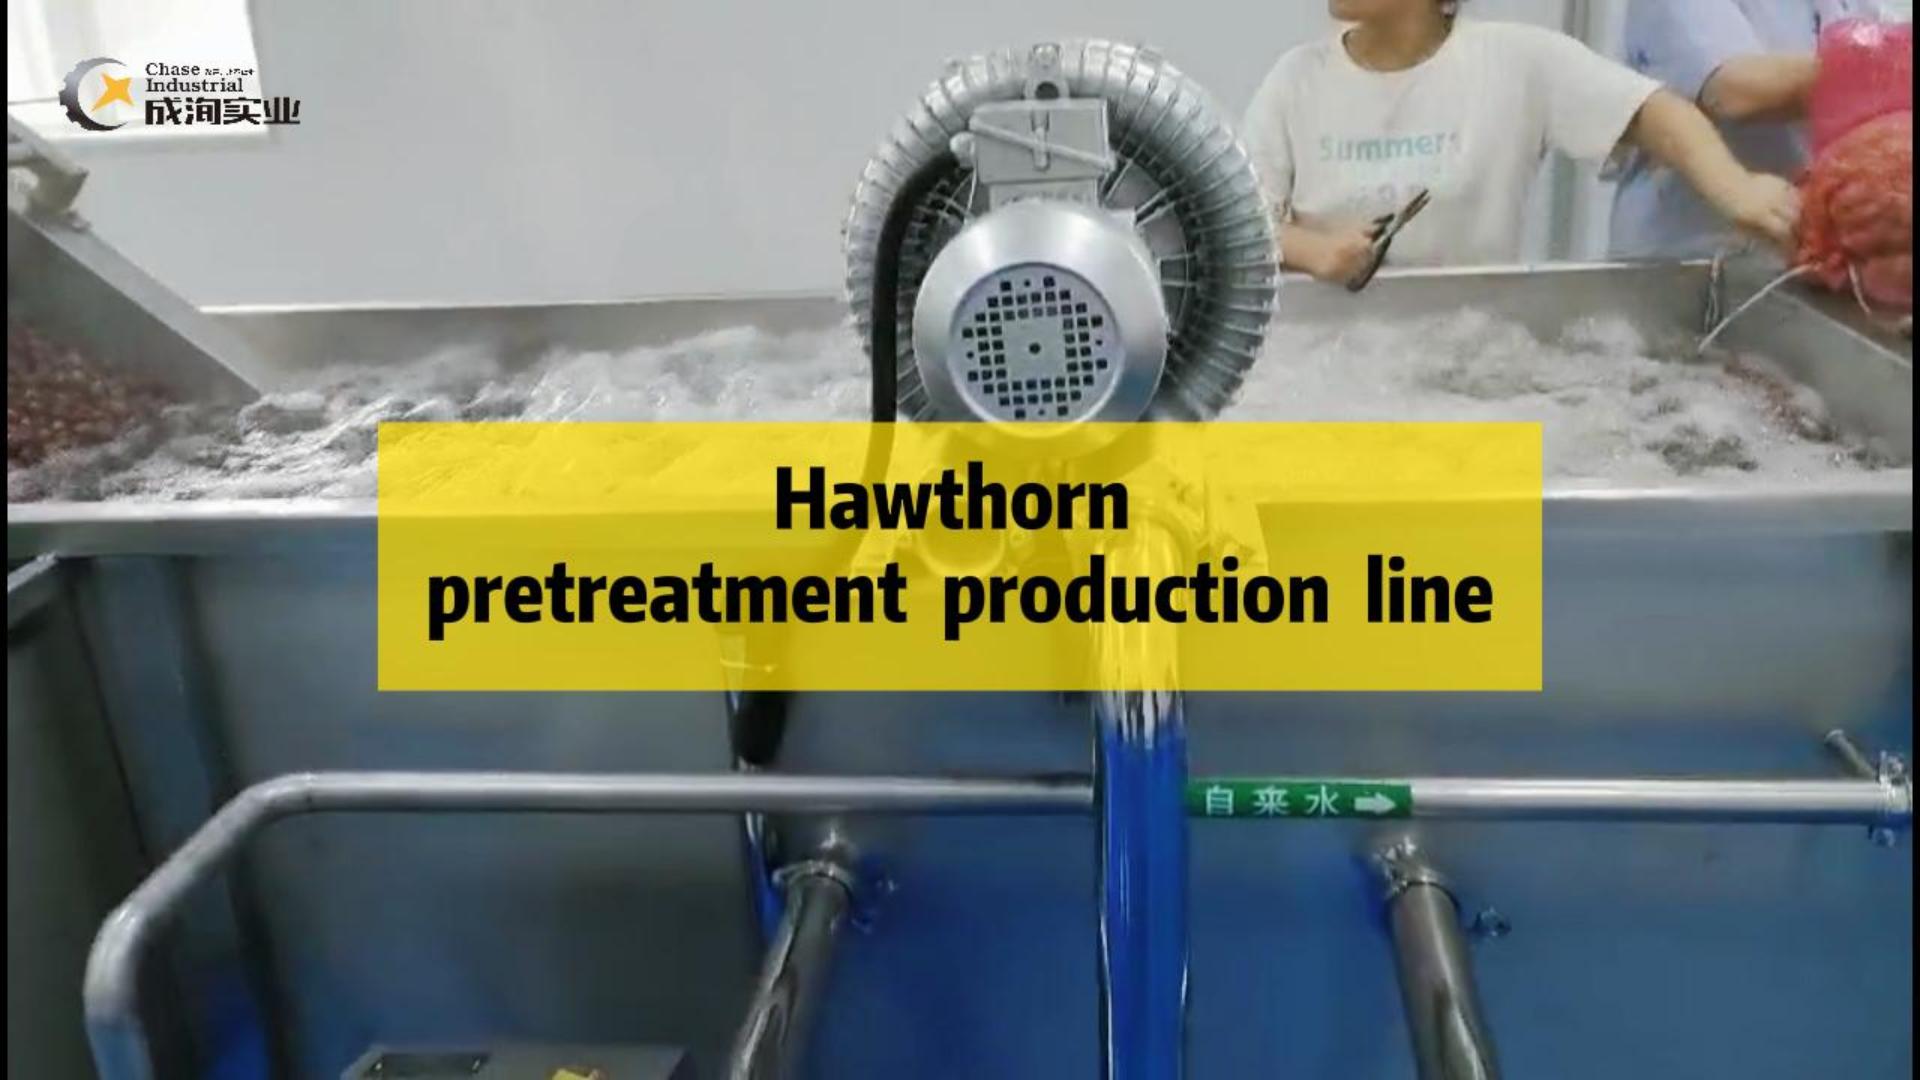 High Quality Best Hawthorn juice processing /pretreatment production line Supplier Wholesale - Shanghai Chase